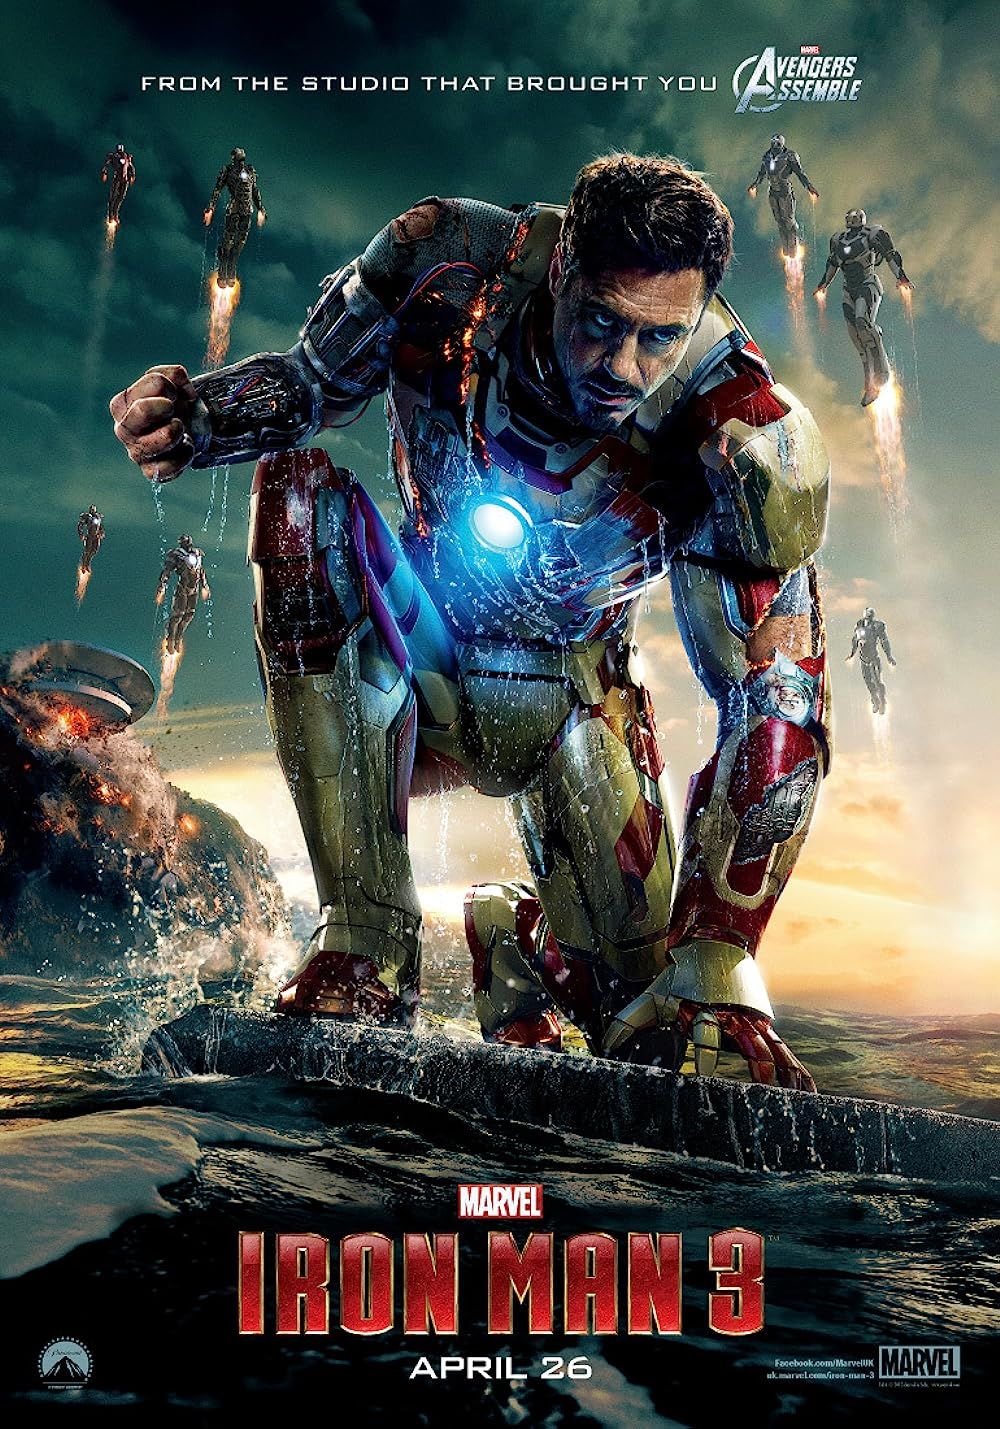 Robert Downey Jr. as Tony Stark on the poster for Iron Man 3